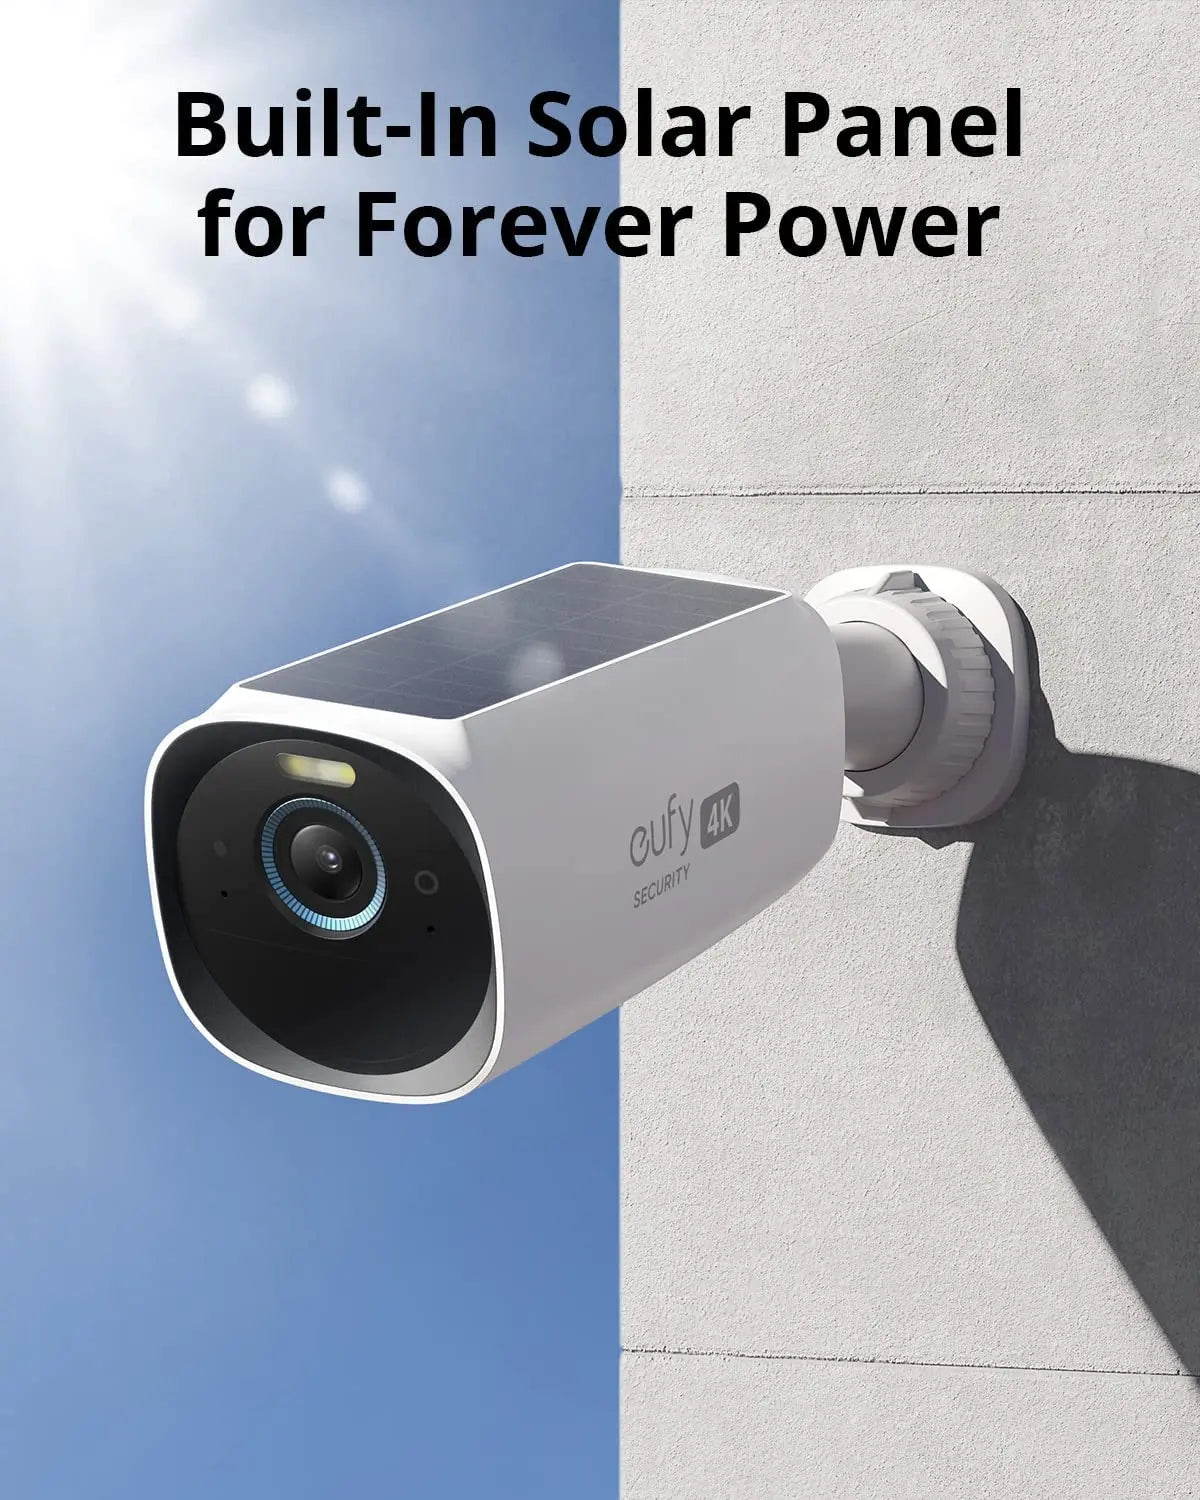 eufy security S330 eufyCam 3 Security Camera Outdoor Wireless 4K Camera Solar Panel Forever Power Face Recognition AI